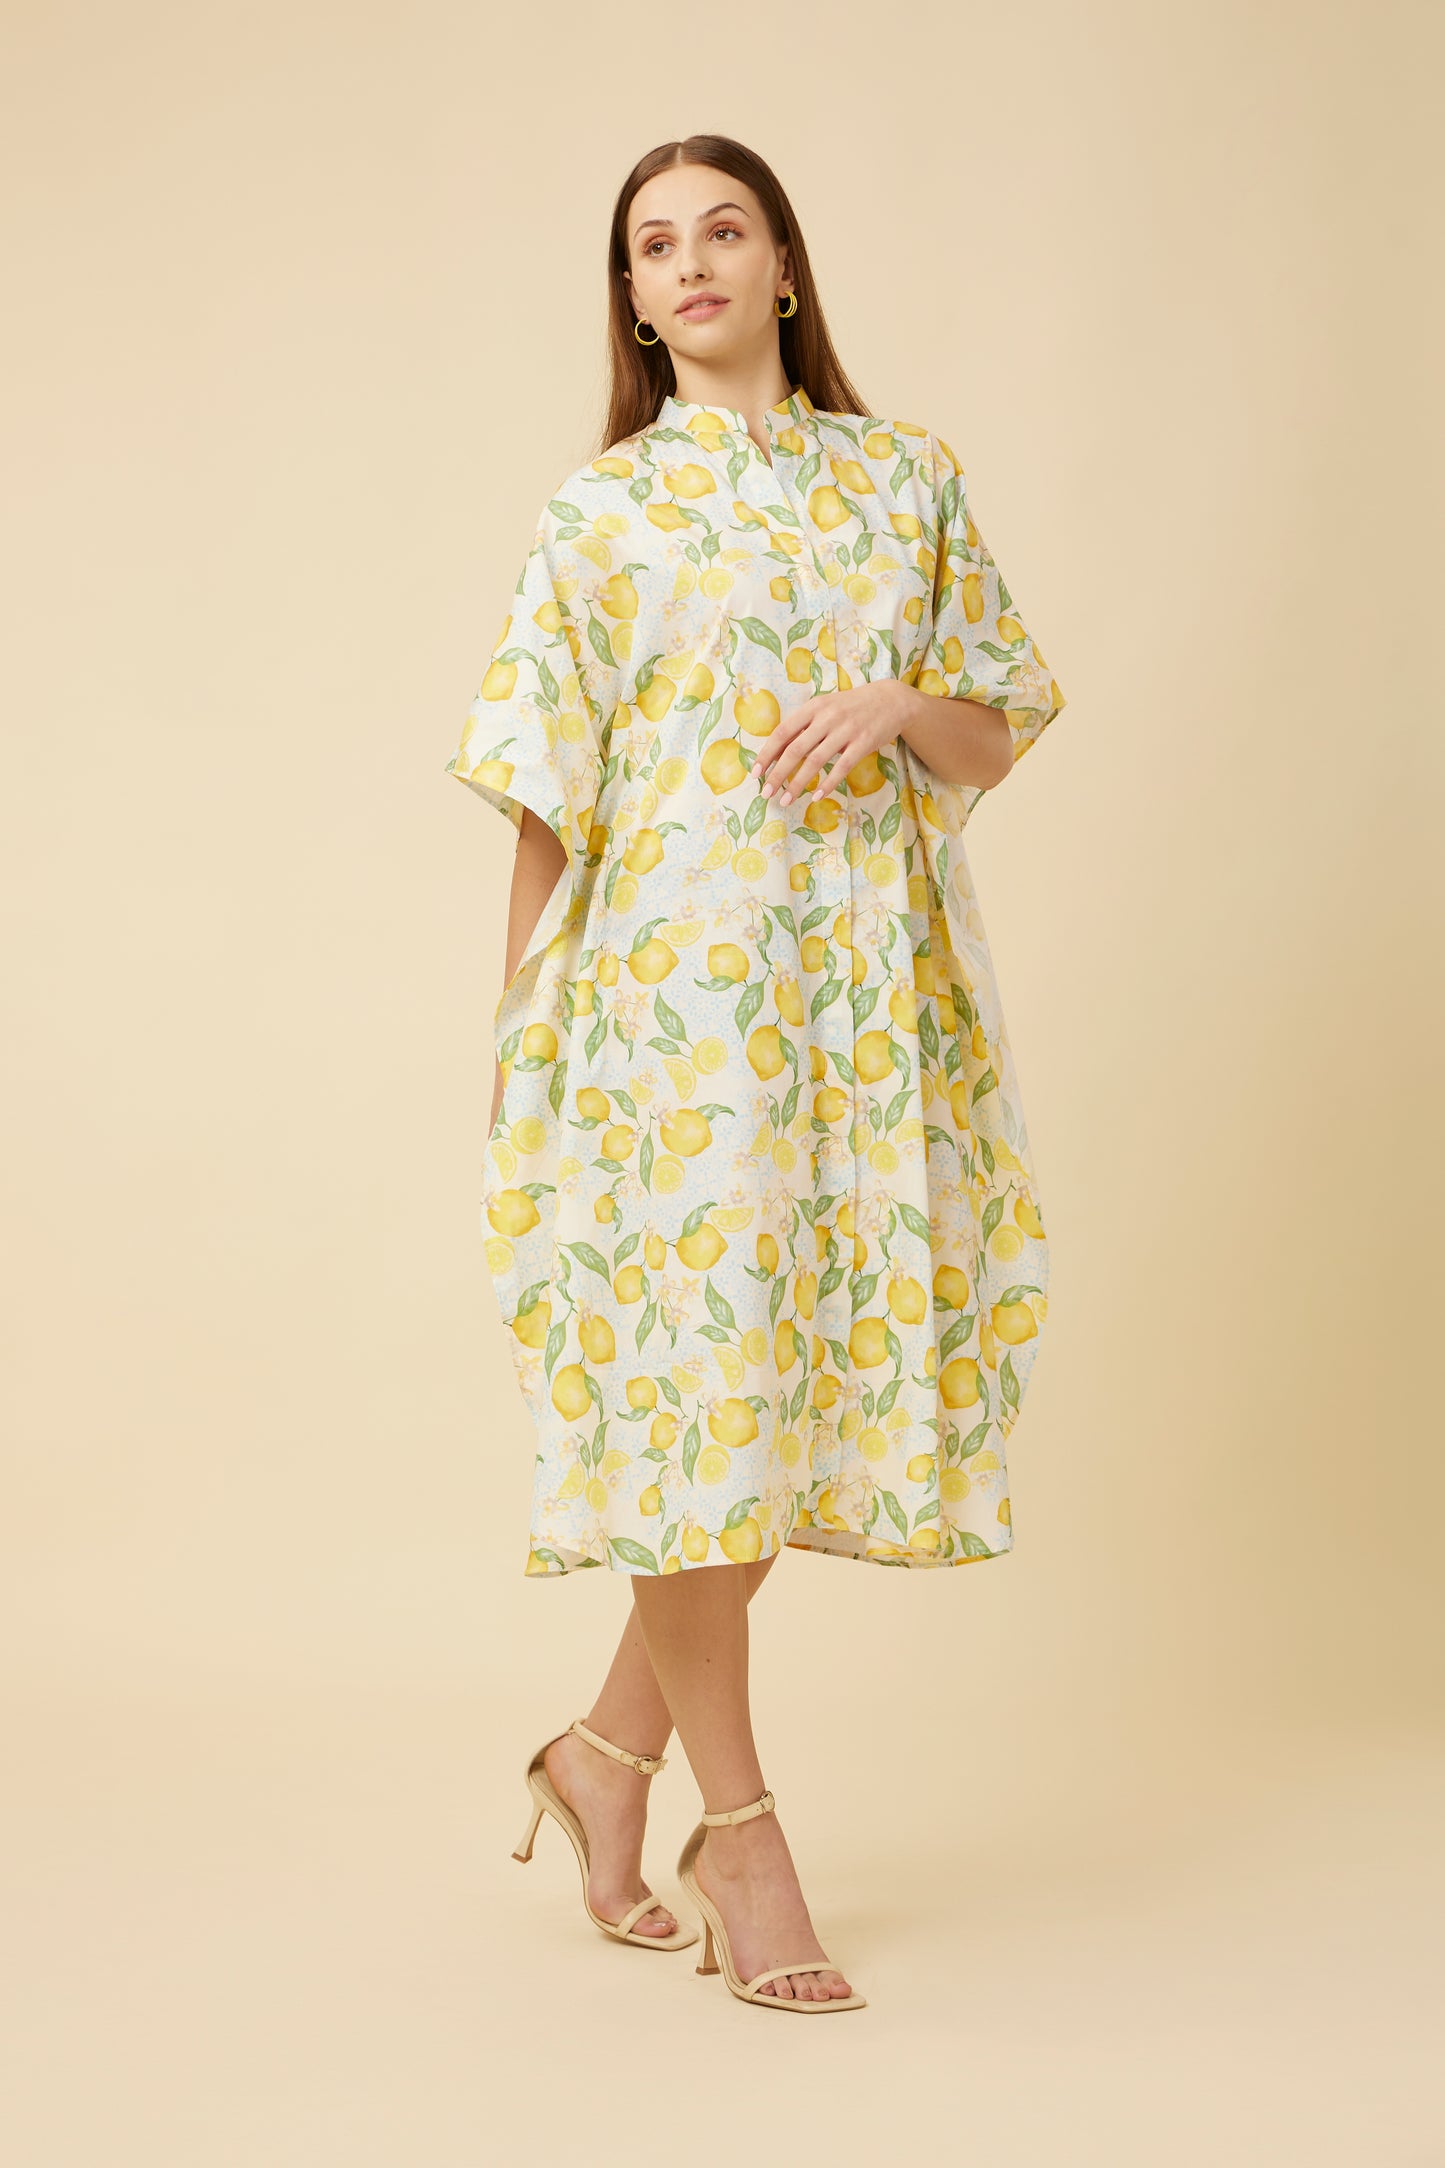 Model wears the Citrus Dream Shirt Dress Kaftan, draped in a fresh lemon tile print. The dress's collar neckline and relaxed fit marry casual comfort with effortless style, making it perfect for a summery vibe.